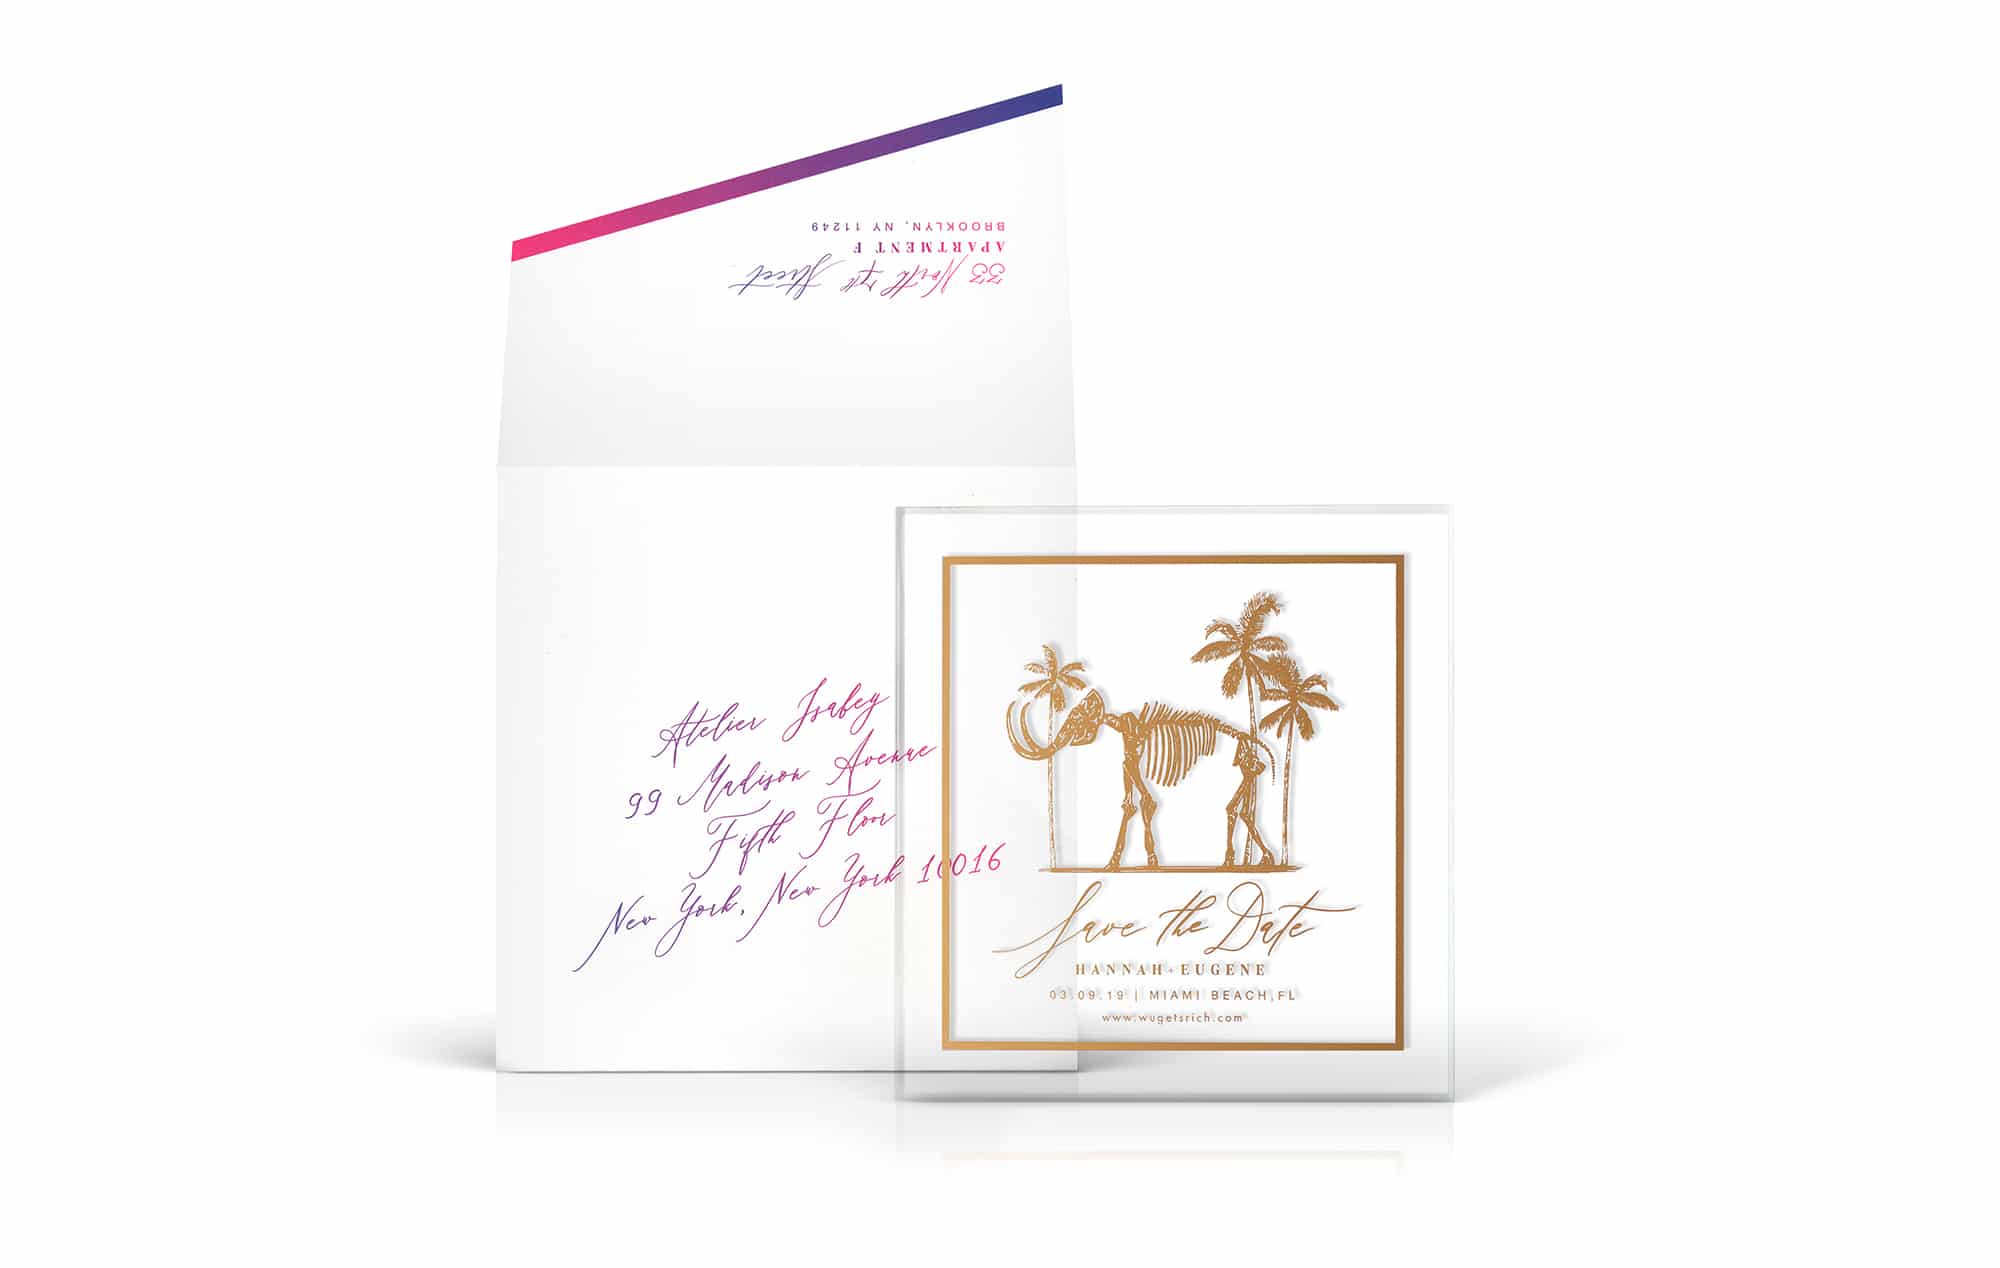 Faena mammoth inspired wedding save the date